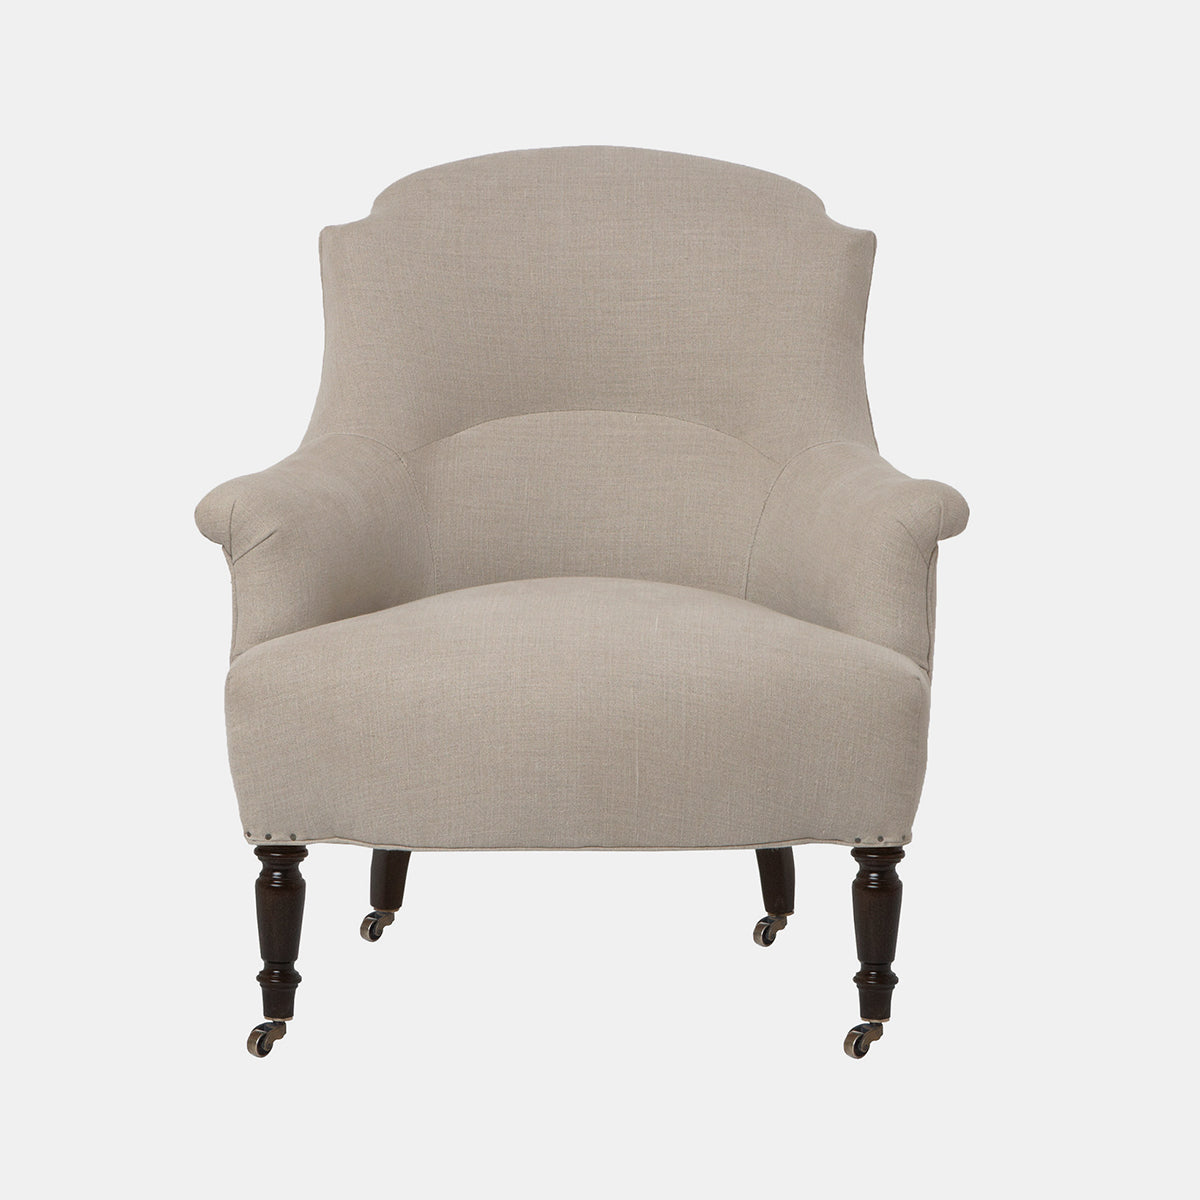 John Derian Tulip Chair in Vintage Flax 100% Linen in stock at Collyer&#39;s Mansion